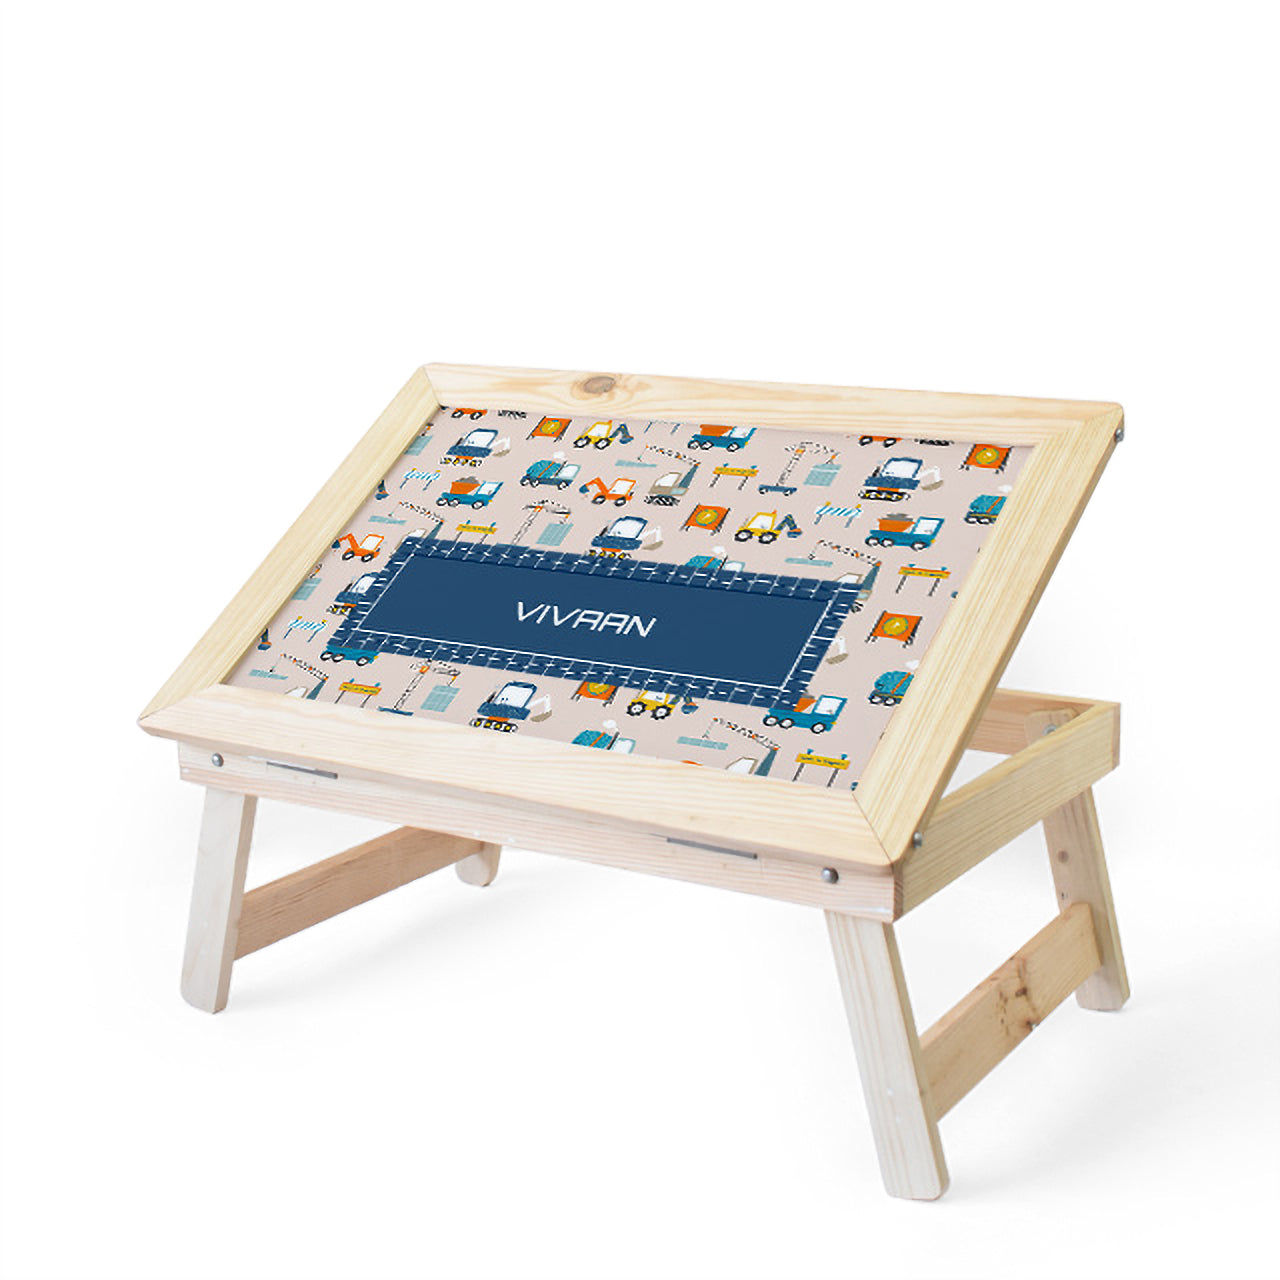 Personalised Foldable Desk - Construction Site